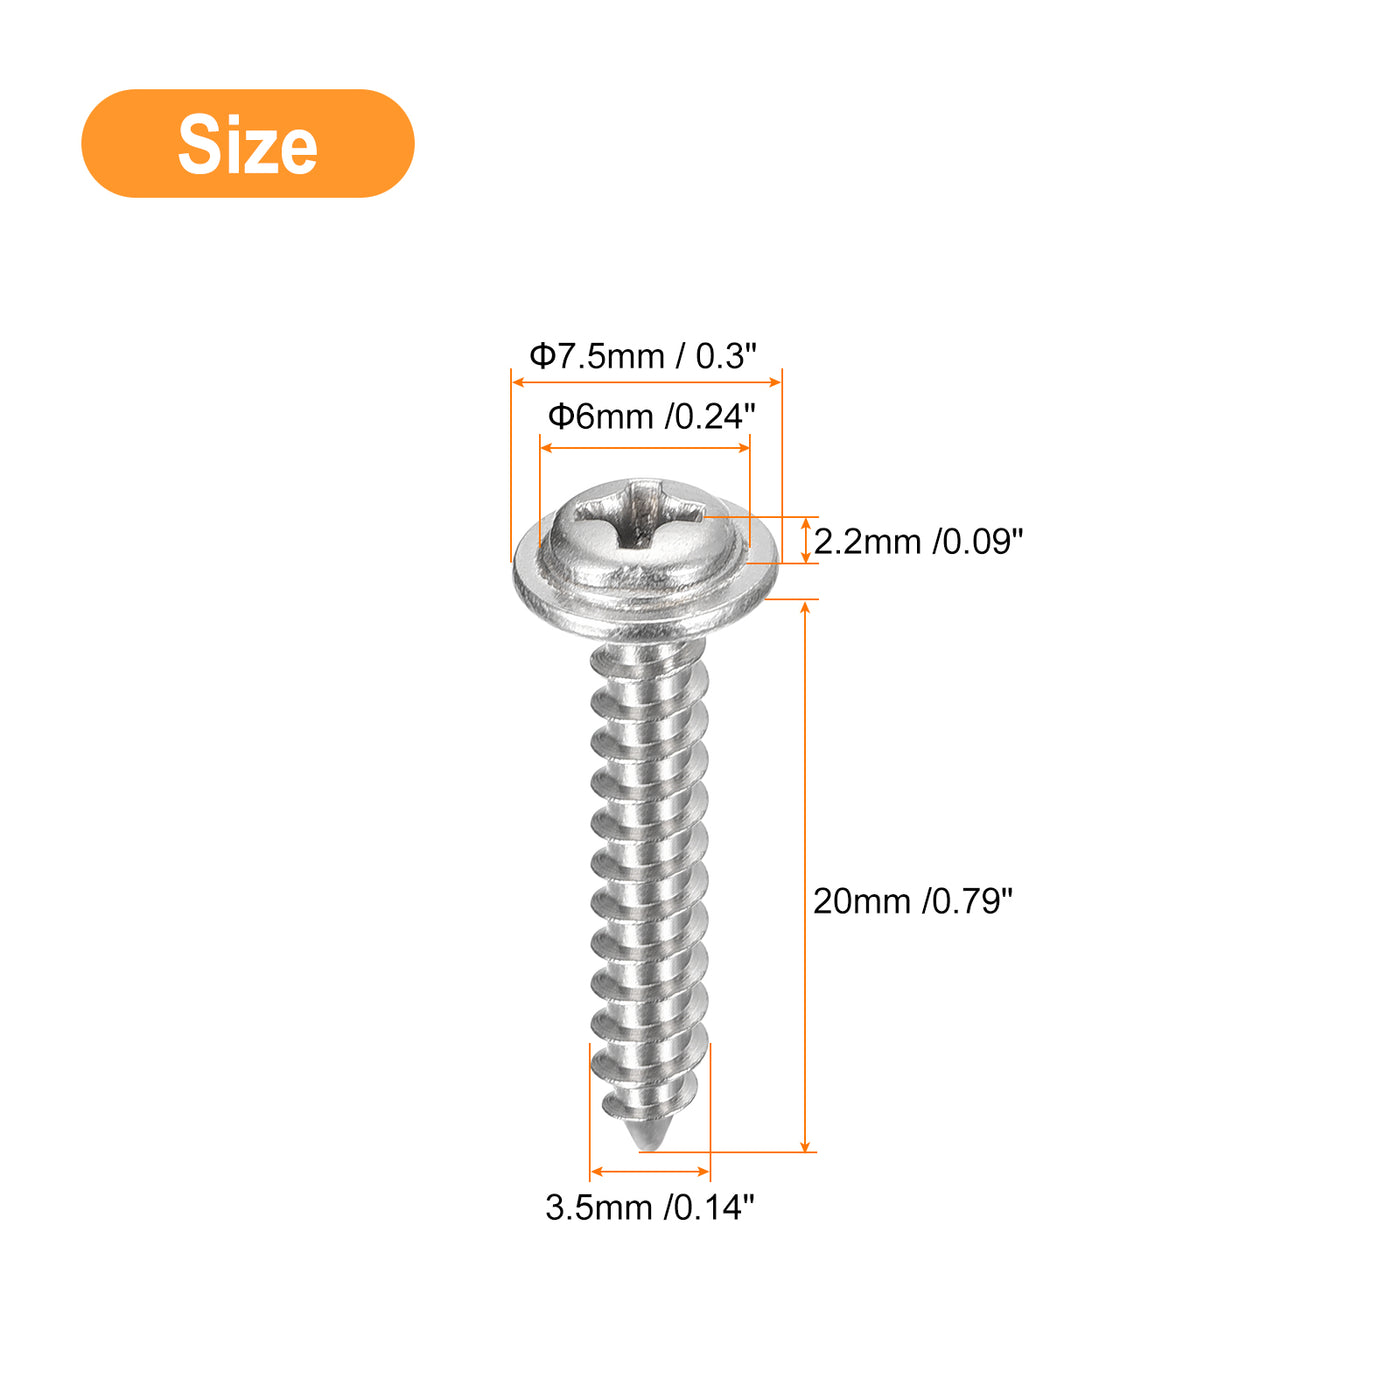 uxcell Uxcell ST3.5x20mm Phillips Pan Head Self-tapping Screw with Washer, 100pcs - 304 Stainless Steel Wood Screw Full Thread (Silver)